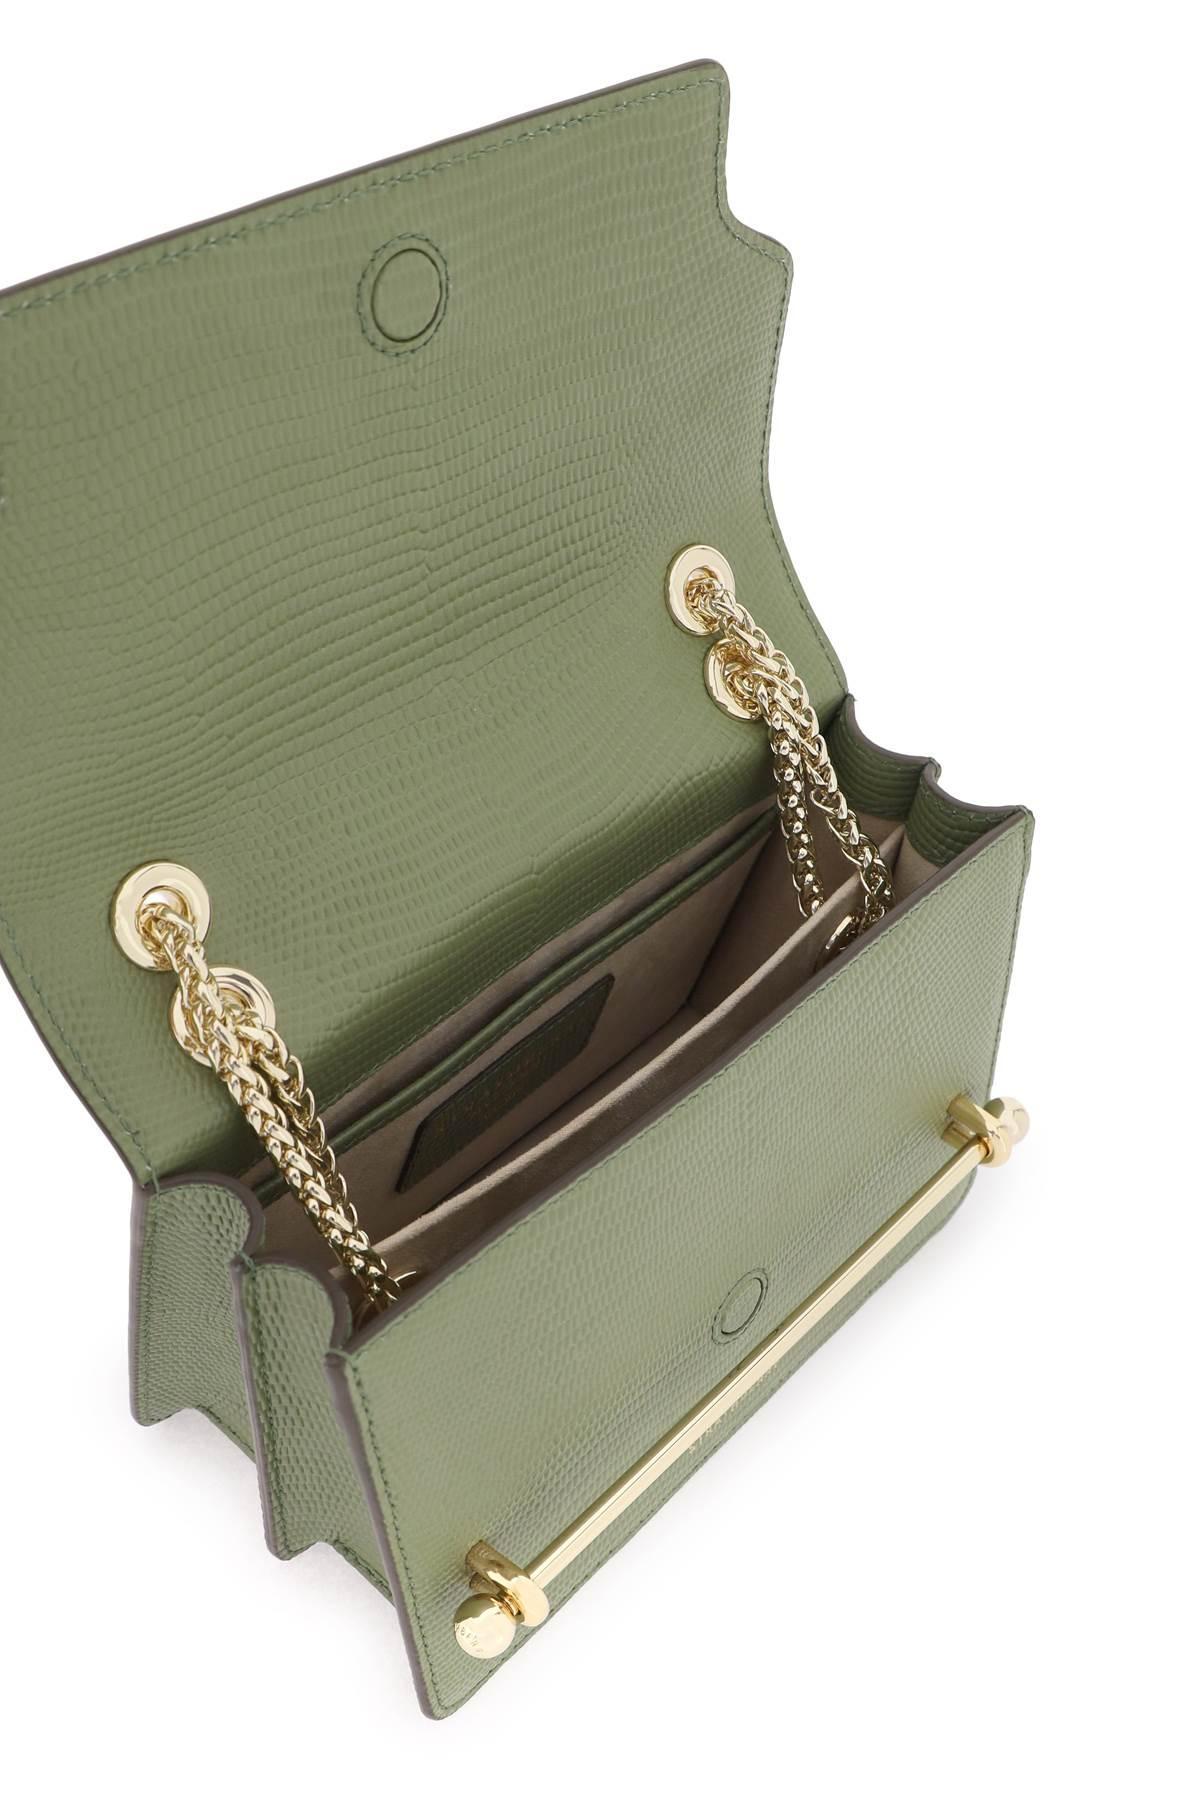 Strathberry, Bags, Strathberry Eastwest Mini In Bottle Green Croc